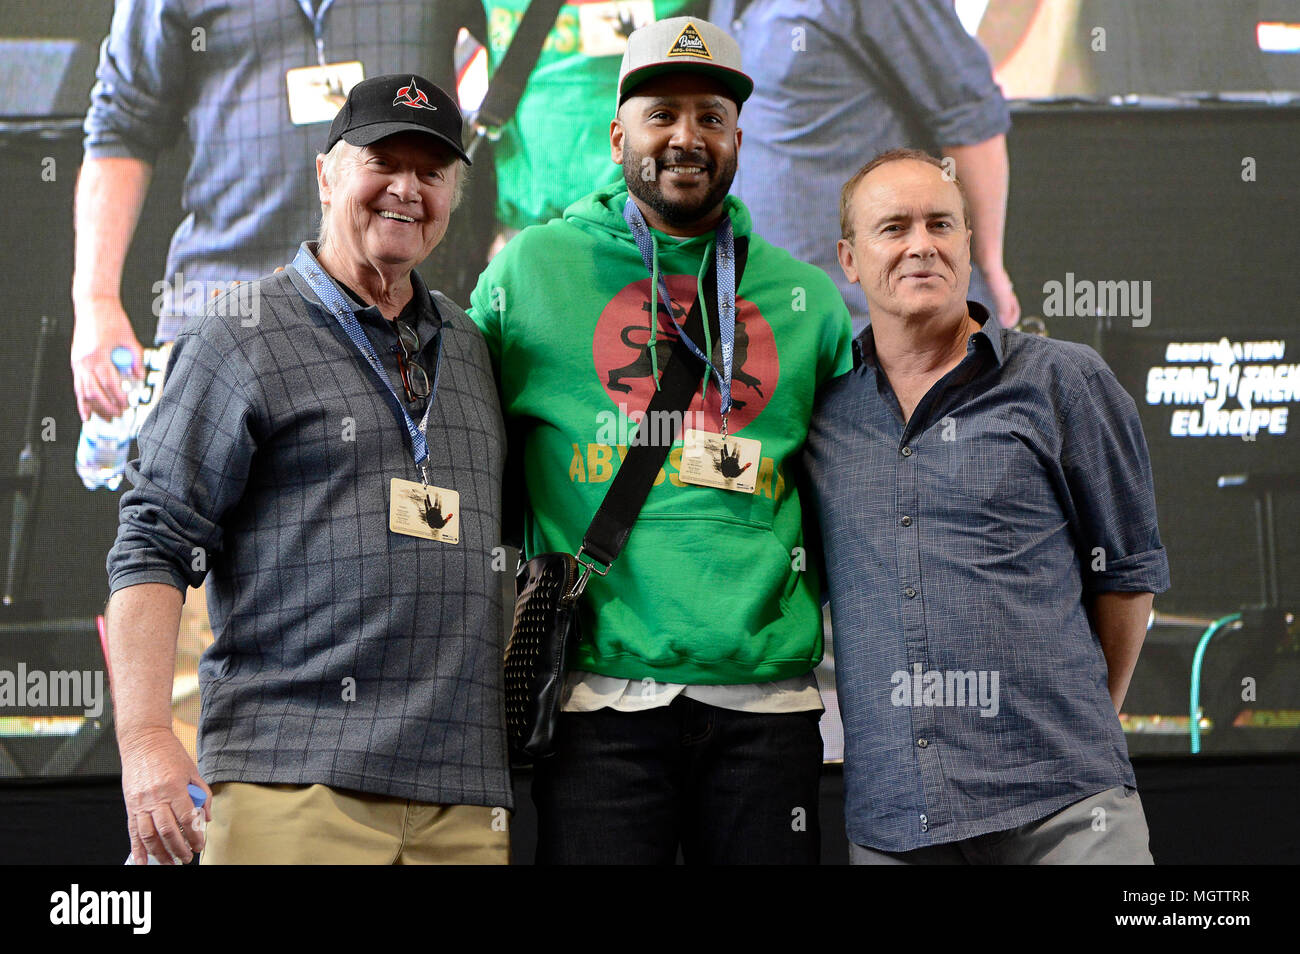 Dortmund, Germany. 27th Apr, 2018. Robert O'Reilly, Cirroc Lofton and Jeffrey Combs at the Destination Star Trek Germany Convention in the Westfalenhalle. Dortmund, 27.04.2018 | usage worldwide Credit: dpa picture alliance/Alamy Live News Stock Photo